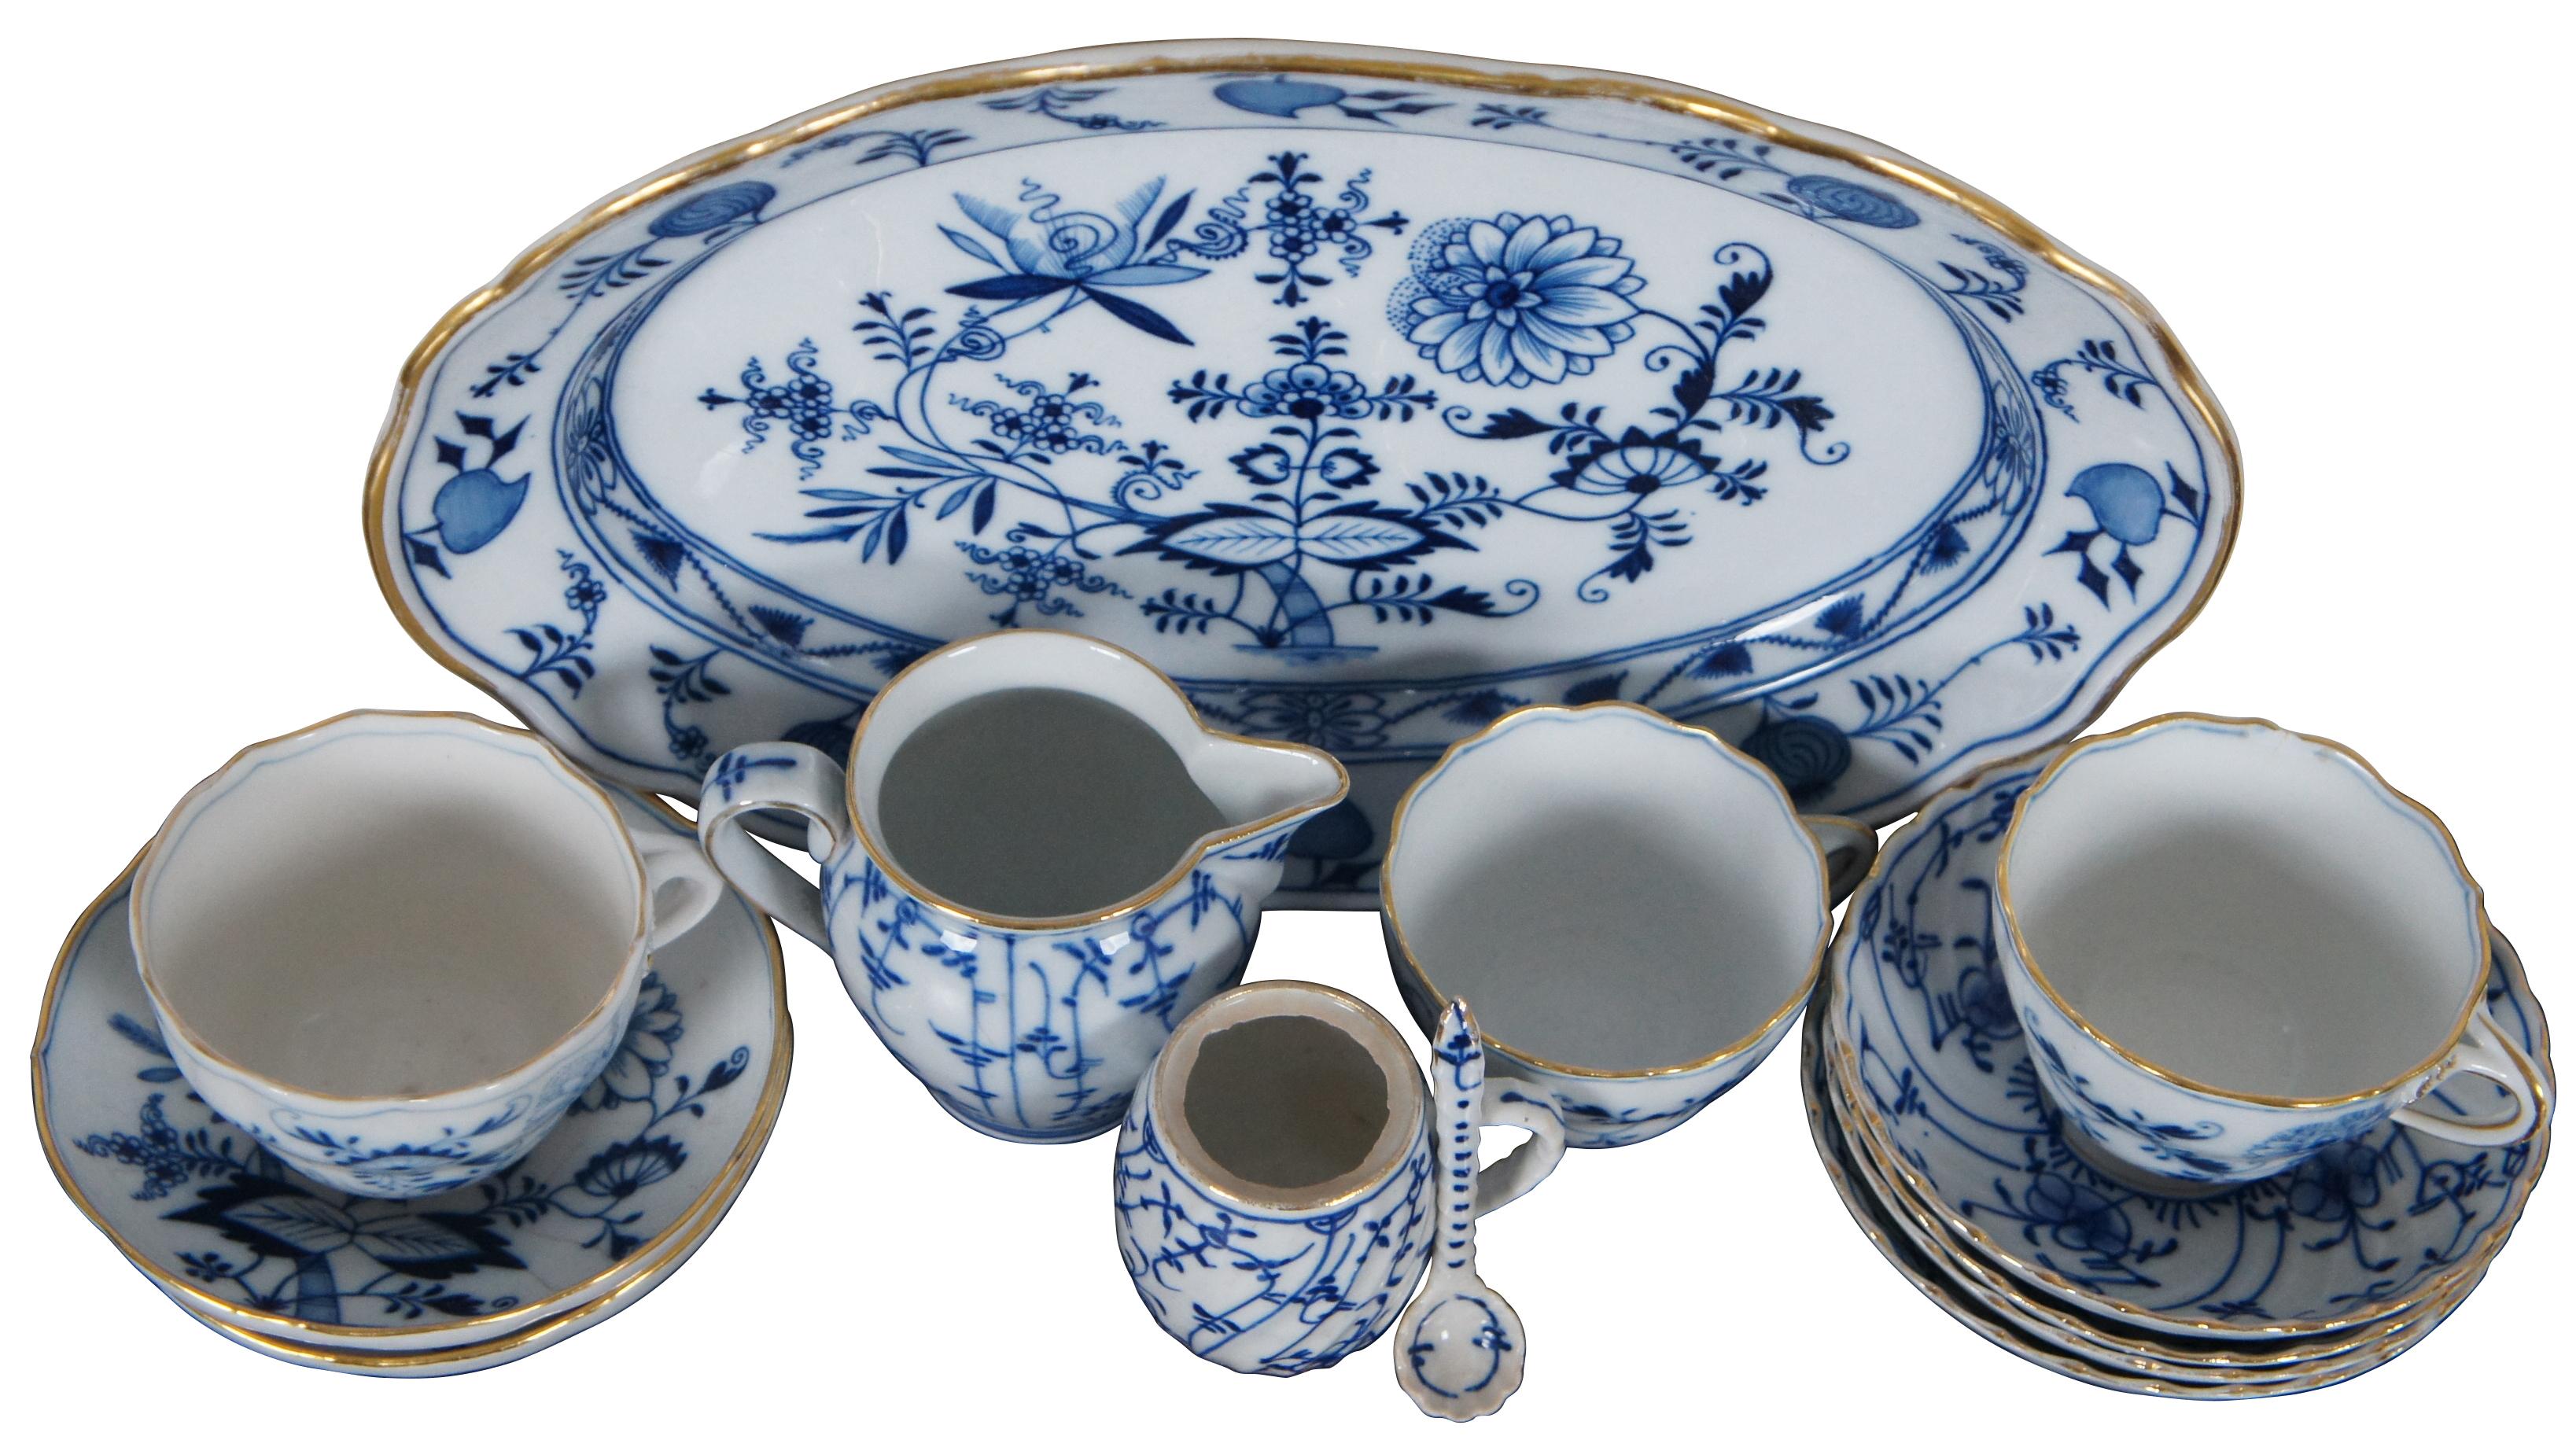 Lot of thirteen 19th century dinnerware pieces by Meissen and Königlich privilegierte Porzellanmanufaktur Tettau, Sontag & Maisel (1879–1902), featuring blue and white Blue Onion patterns and gilded accents.

Measures: Oval platter - 13” x 9.5” x